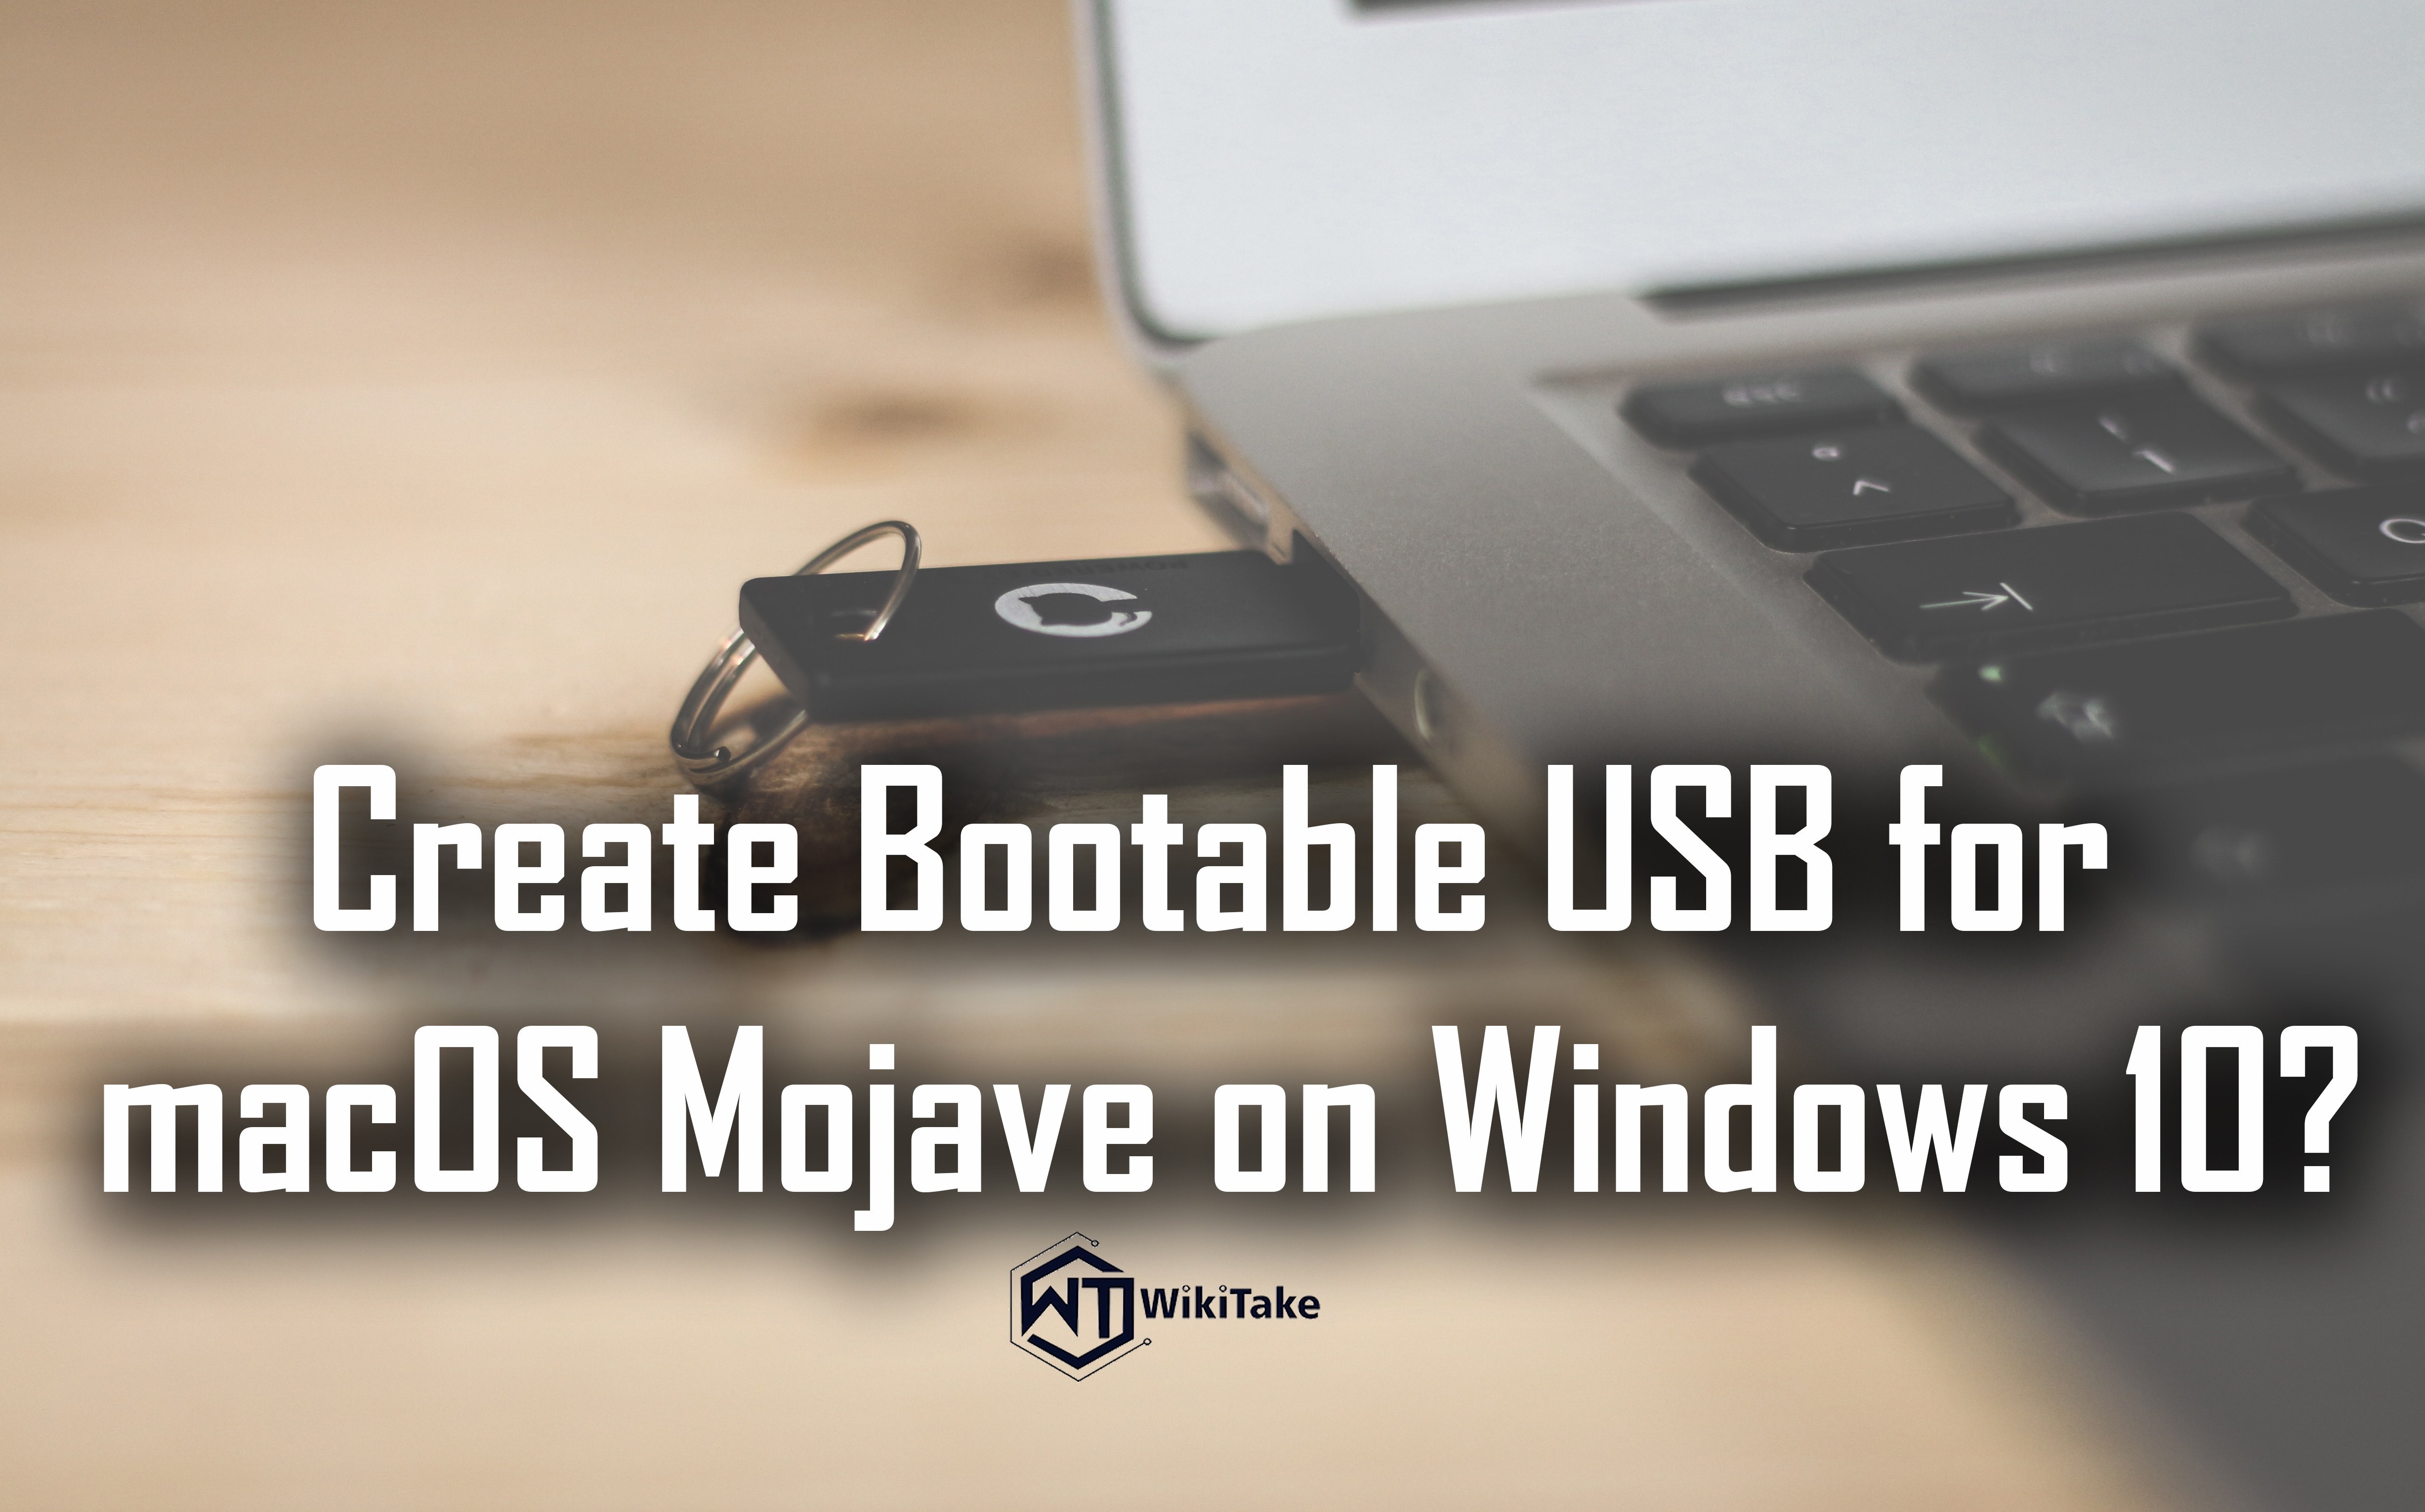 mac os boot from usb